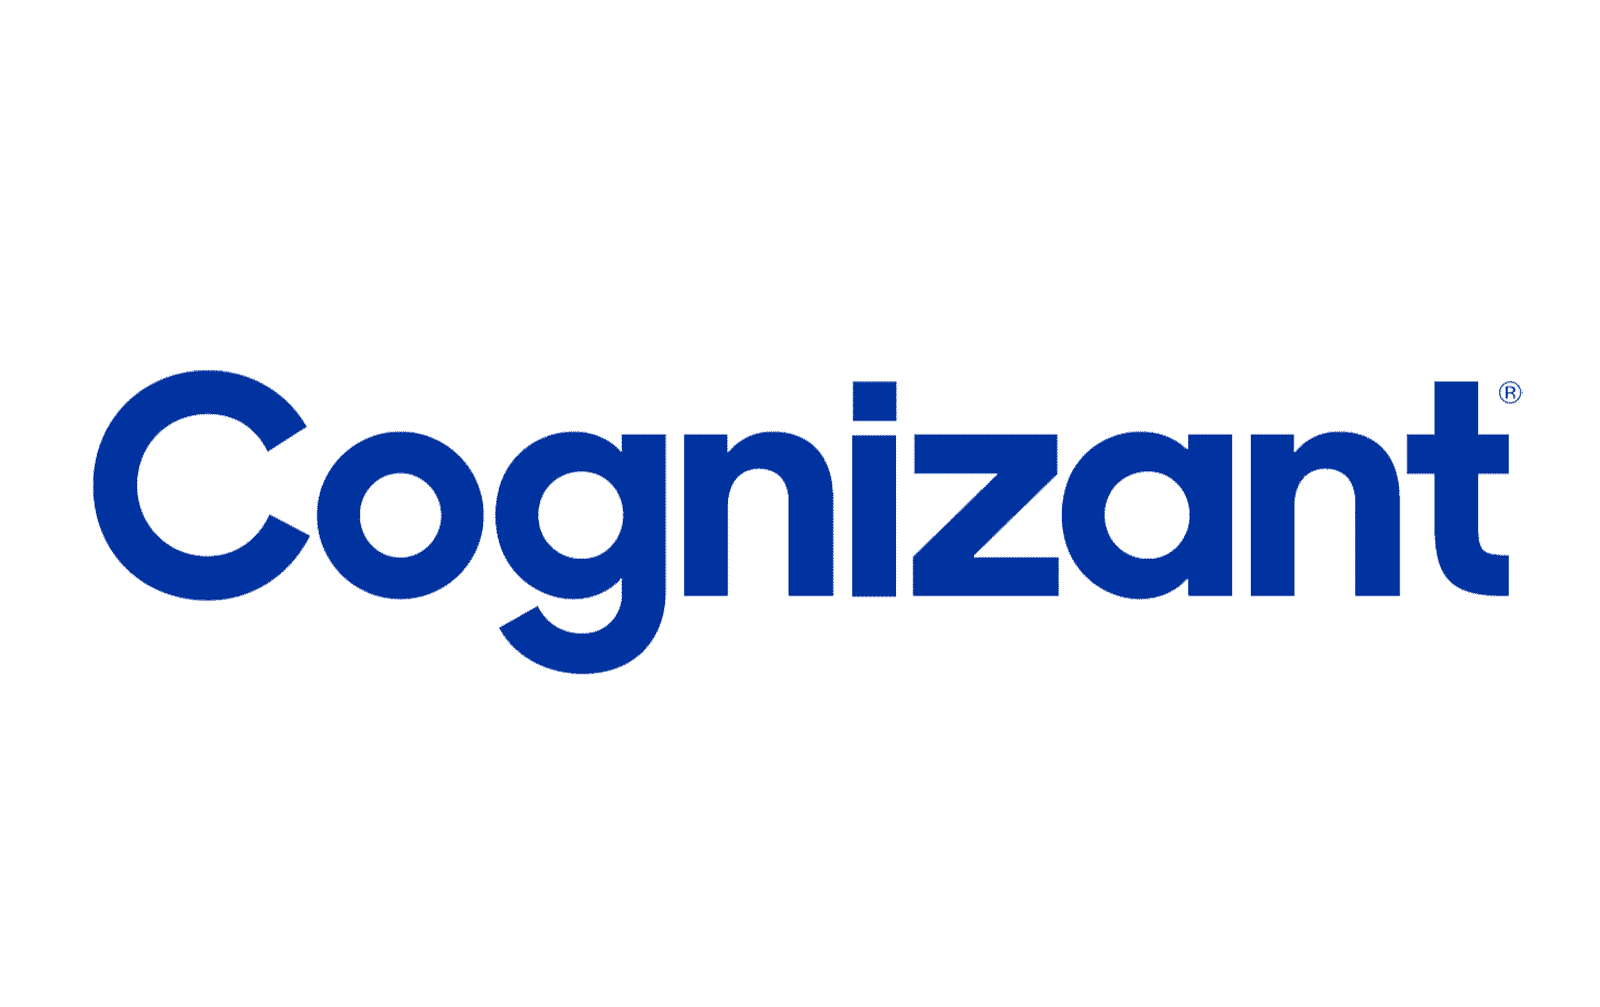 The logo for Cognizant